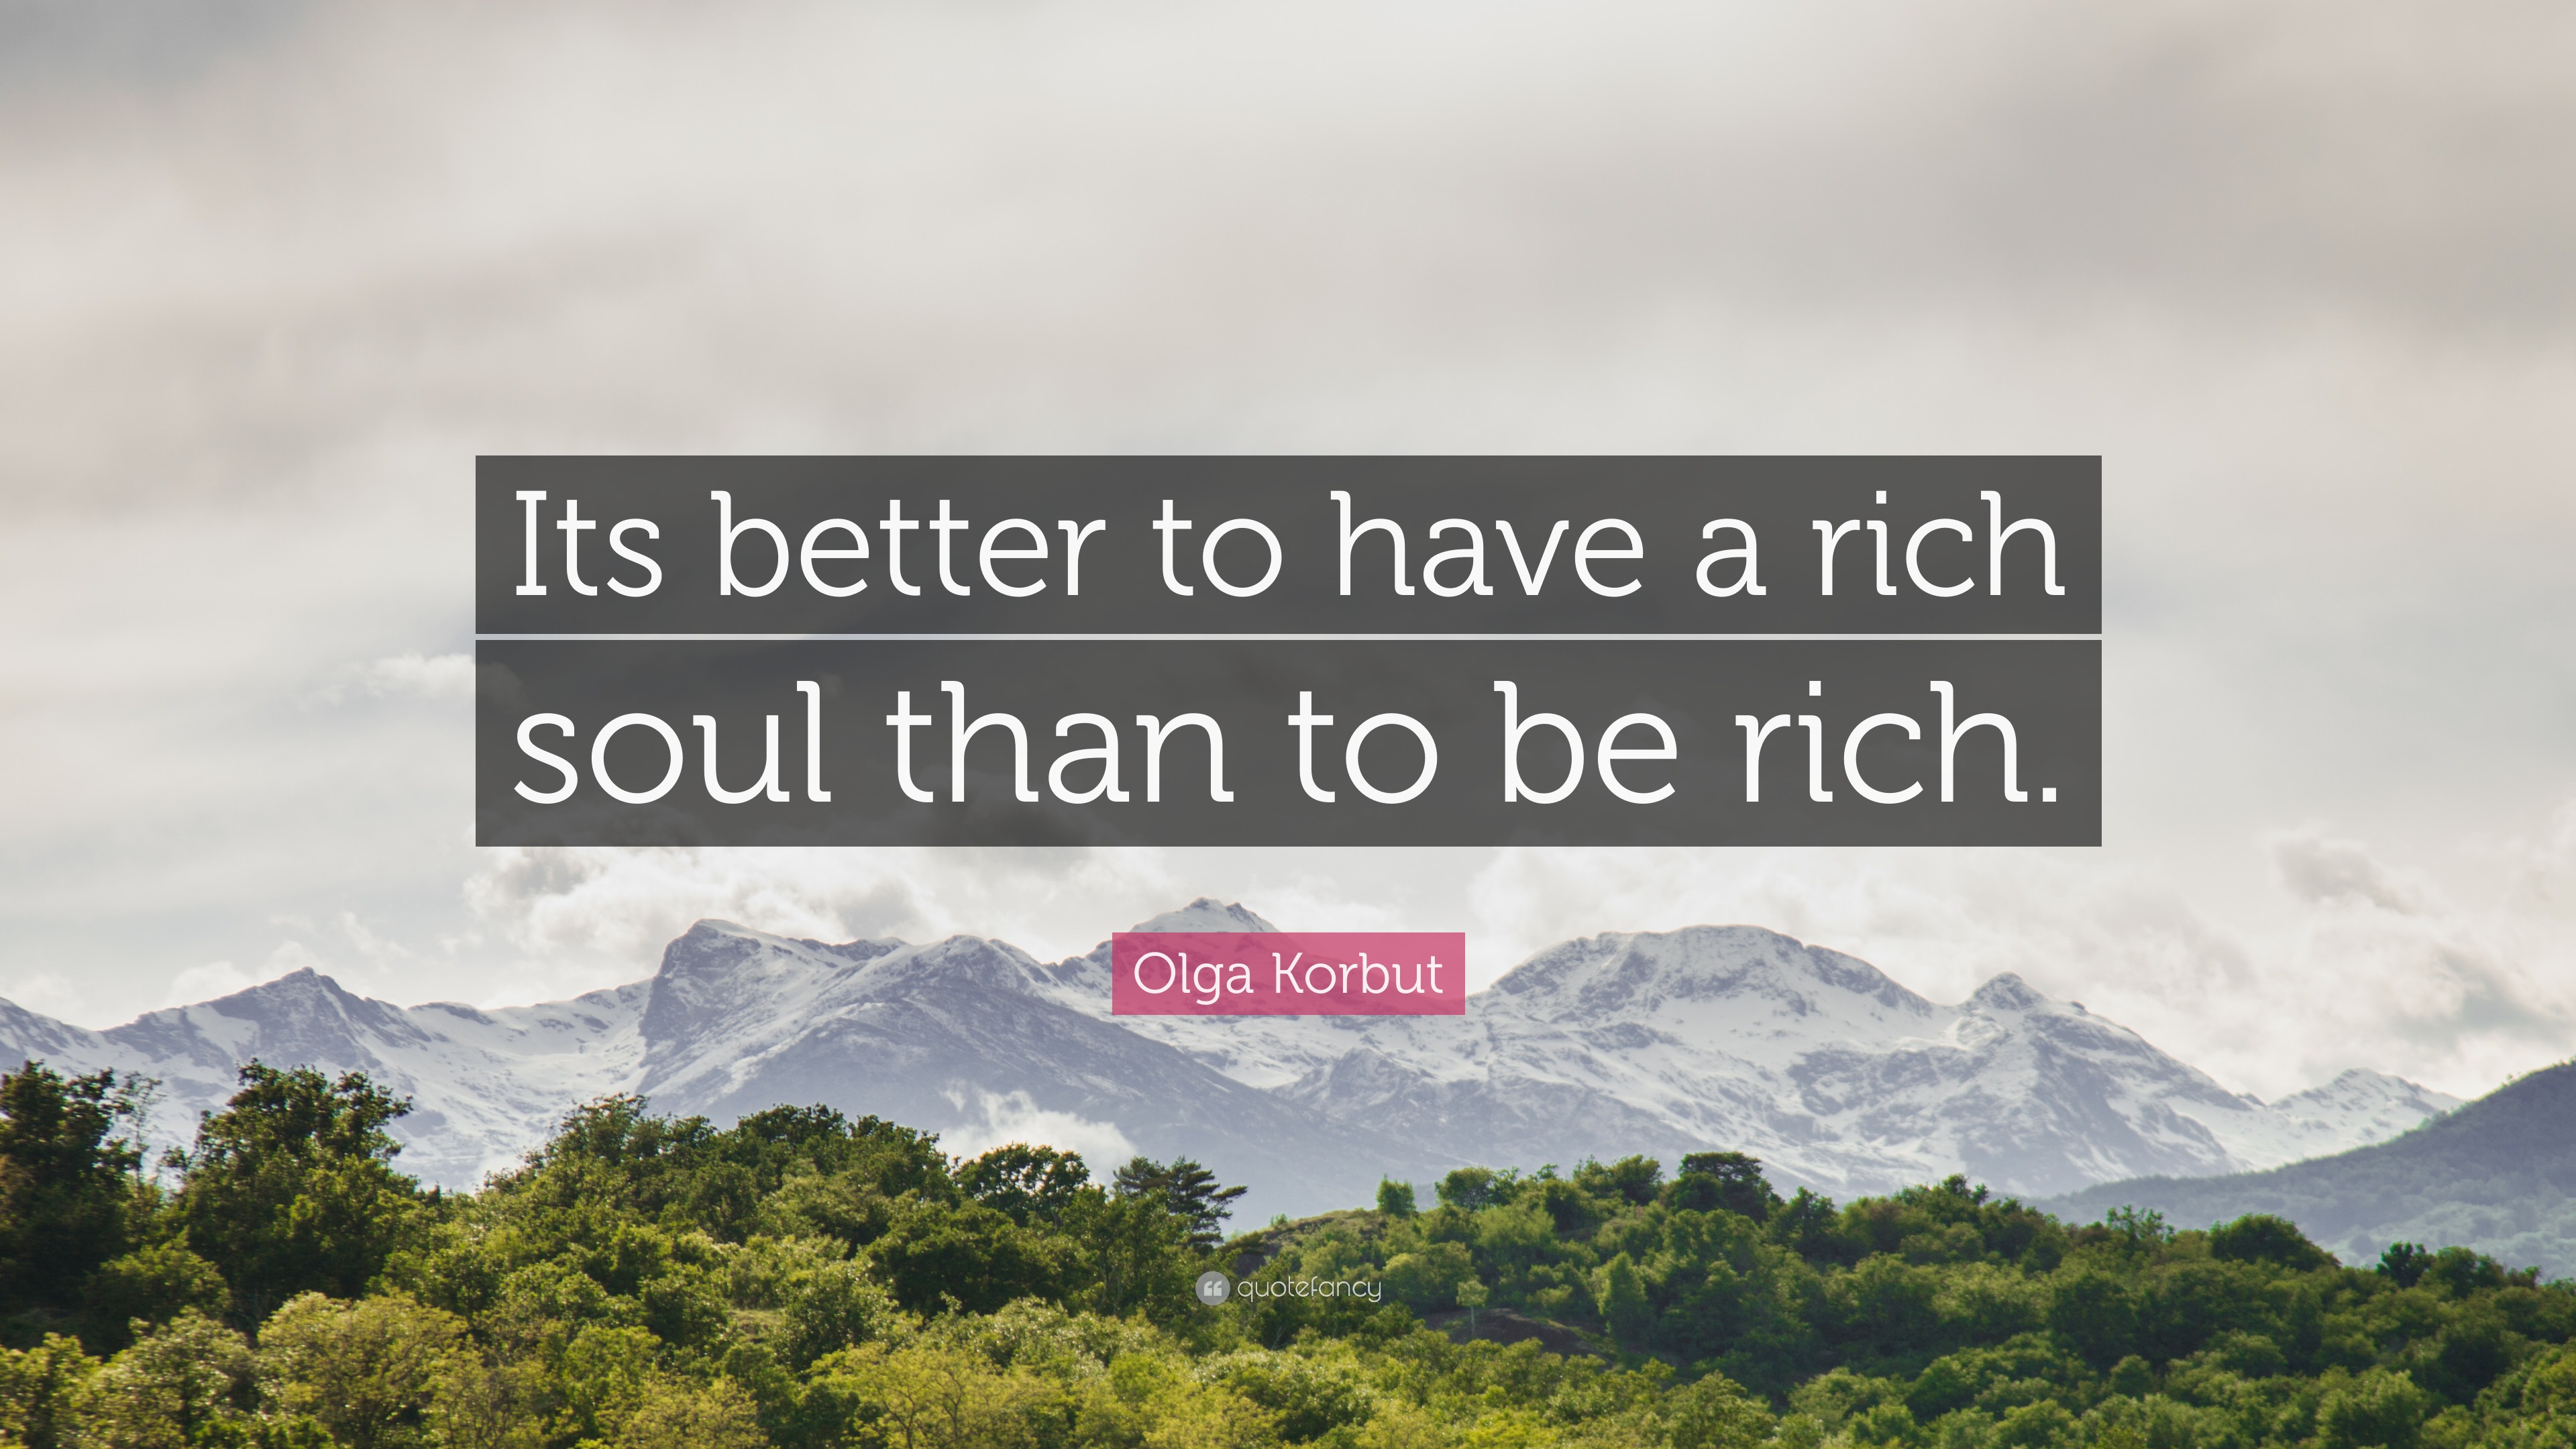 https://quotefancy.com/media/wallpaper/3840x2160/5332000-Olga-Korbut-Quote-Its-better-to-have-a-rich-soul-than-to-be-rich.jpg